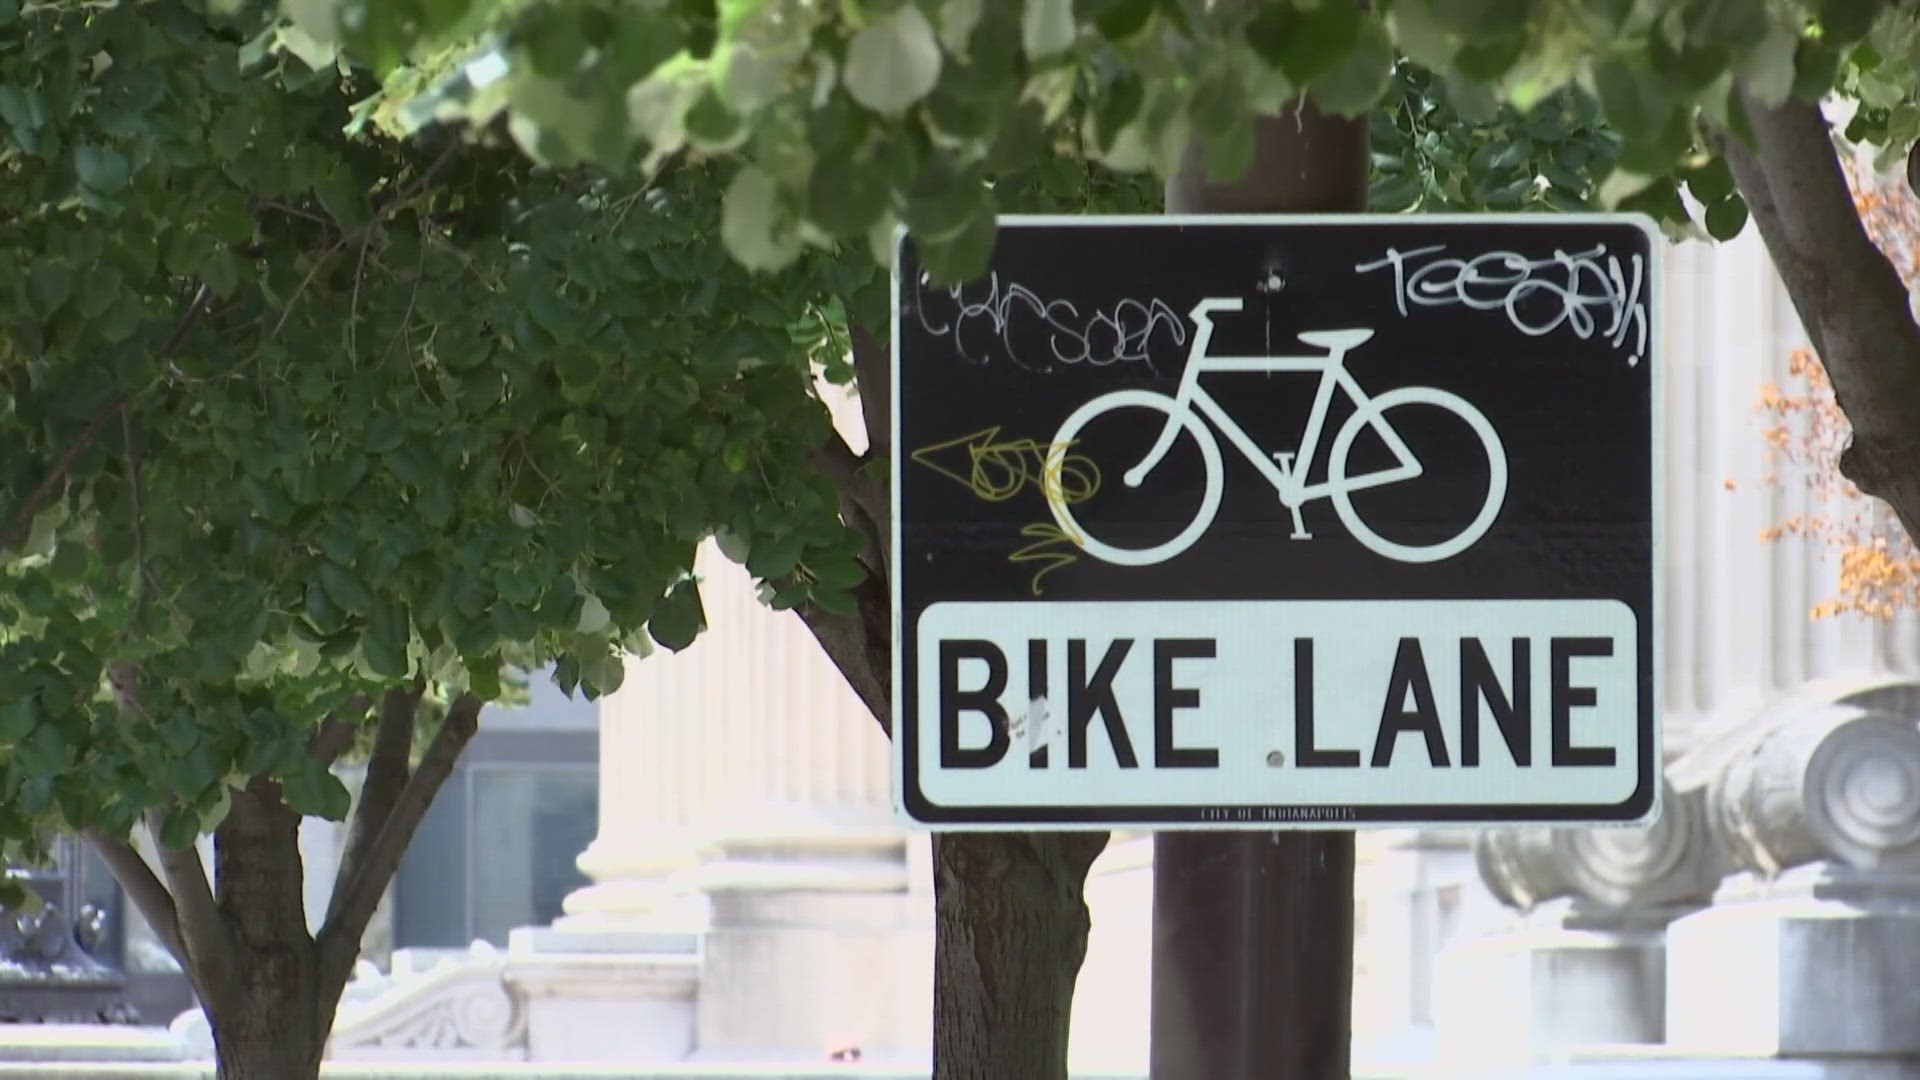 13News reporter Lauren Kostiuk details how drivers are blocking bike lanes in Indianapolis and the city's effort to put a stop to it.